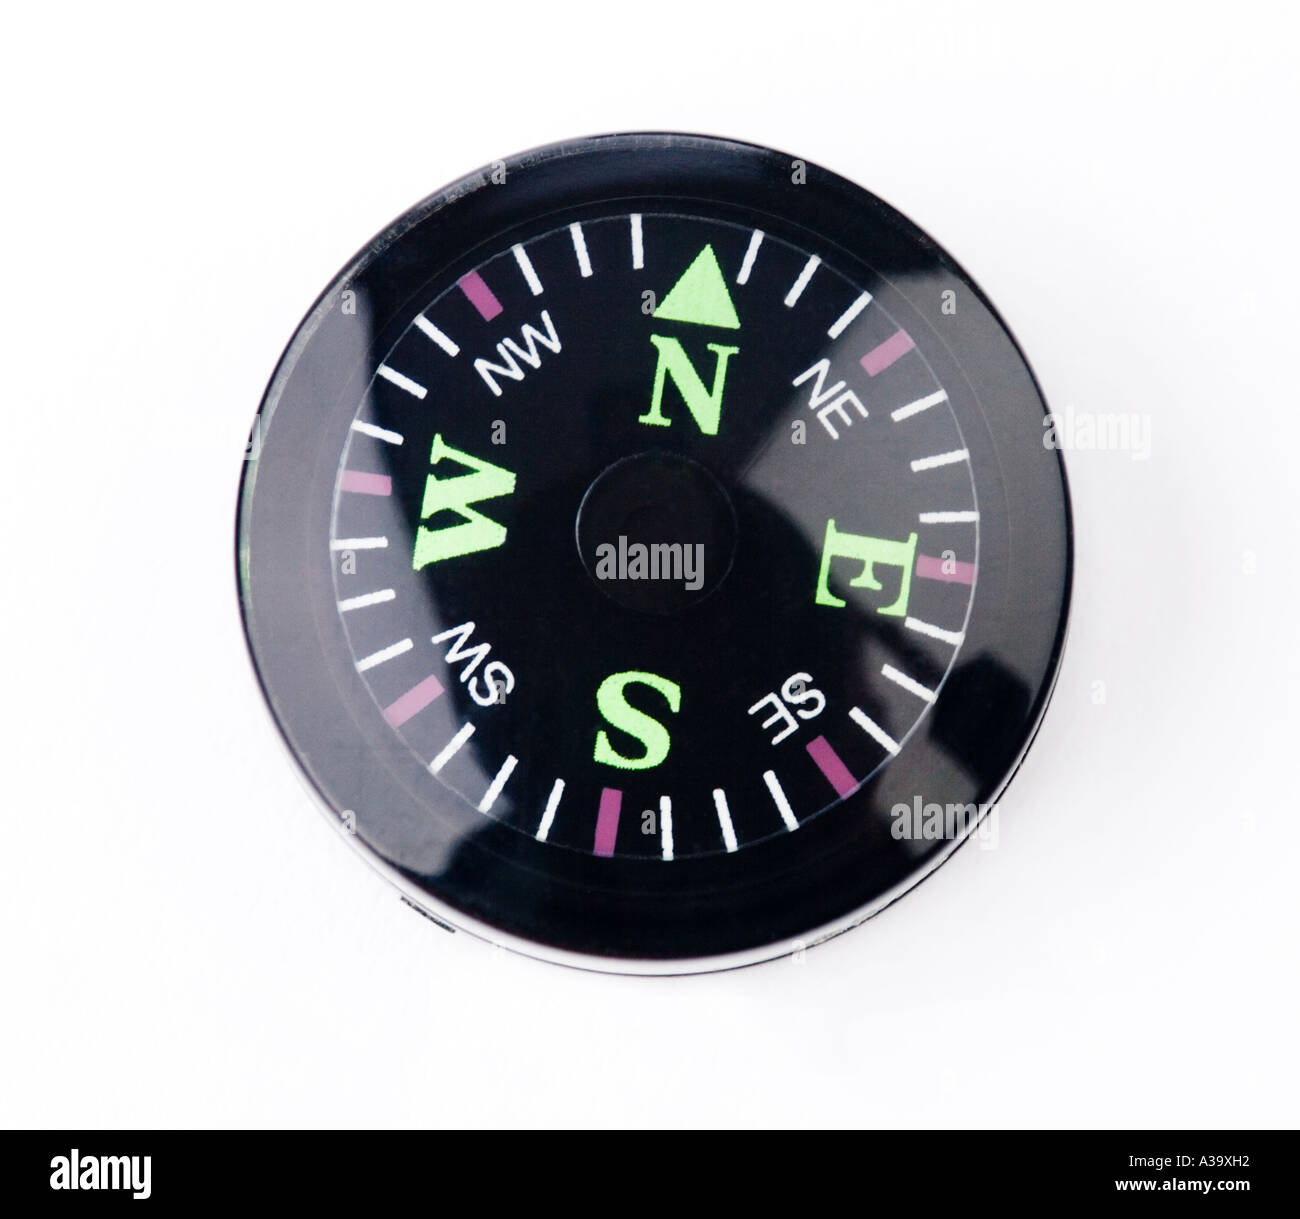 Compass Dial High Resolution Stock Photography and Images - Alamy